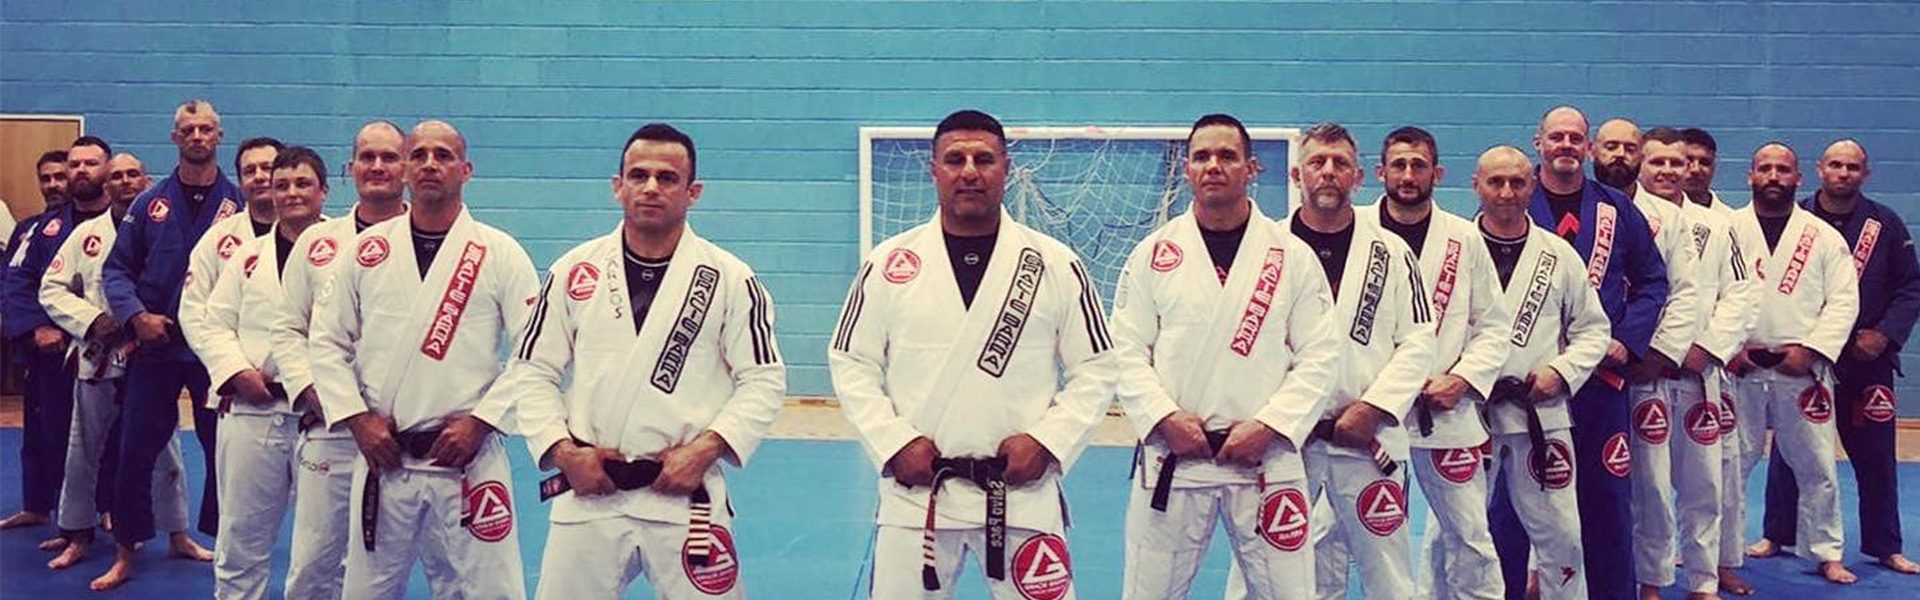 banner-we-are-gracie-barra